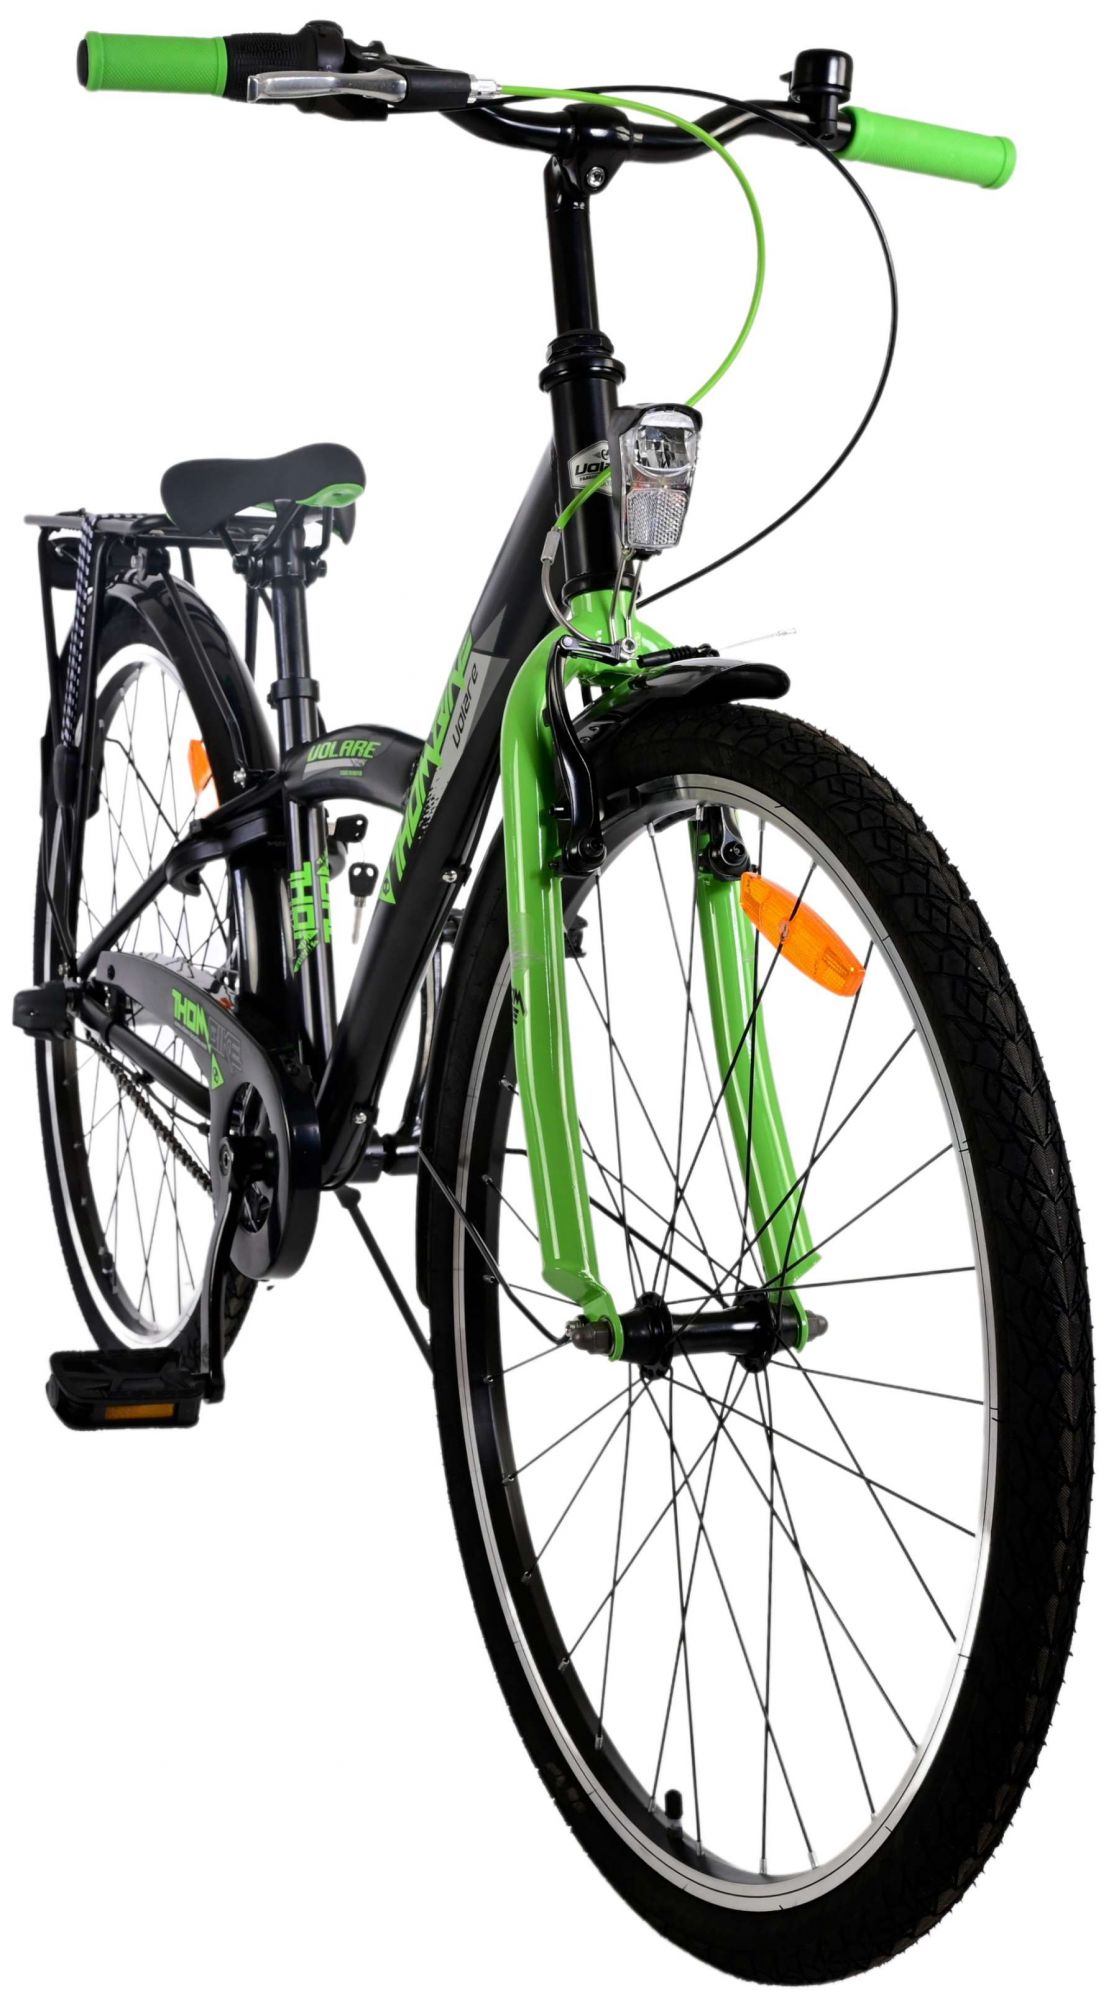 Thombike_26_inch_-_6-W1800_pigy-tr